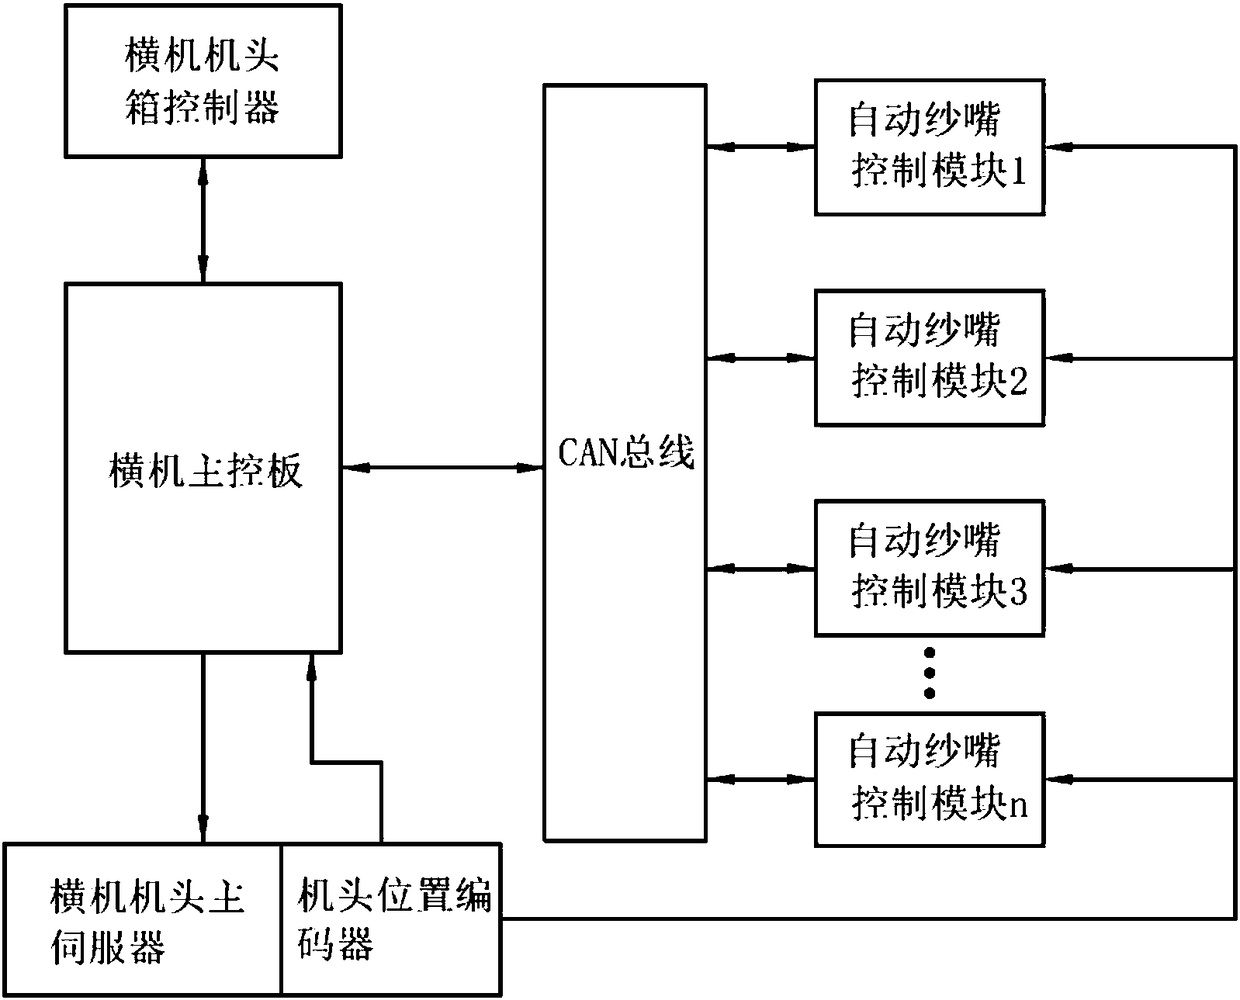 Networking control system for flat knitting machine provided with self-running type yarn guide